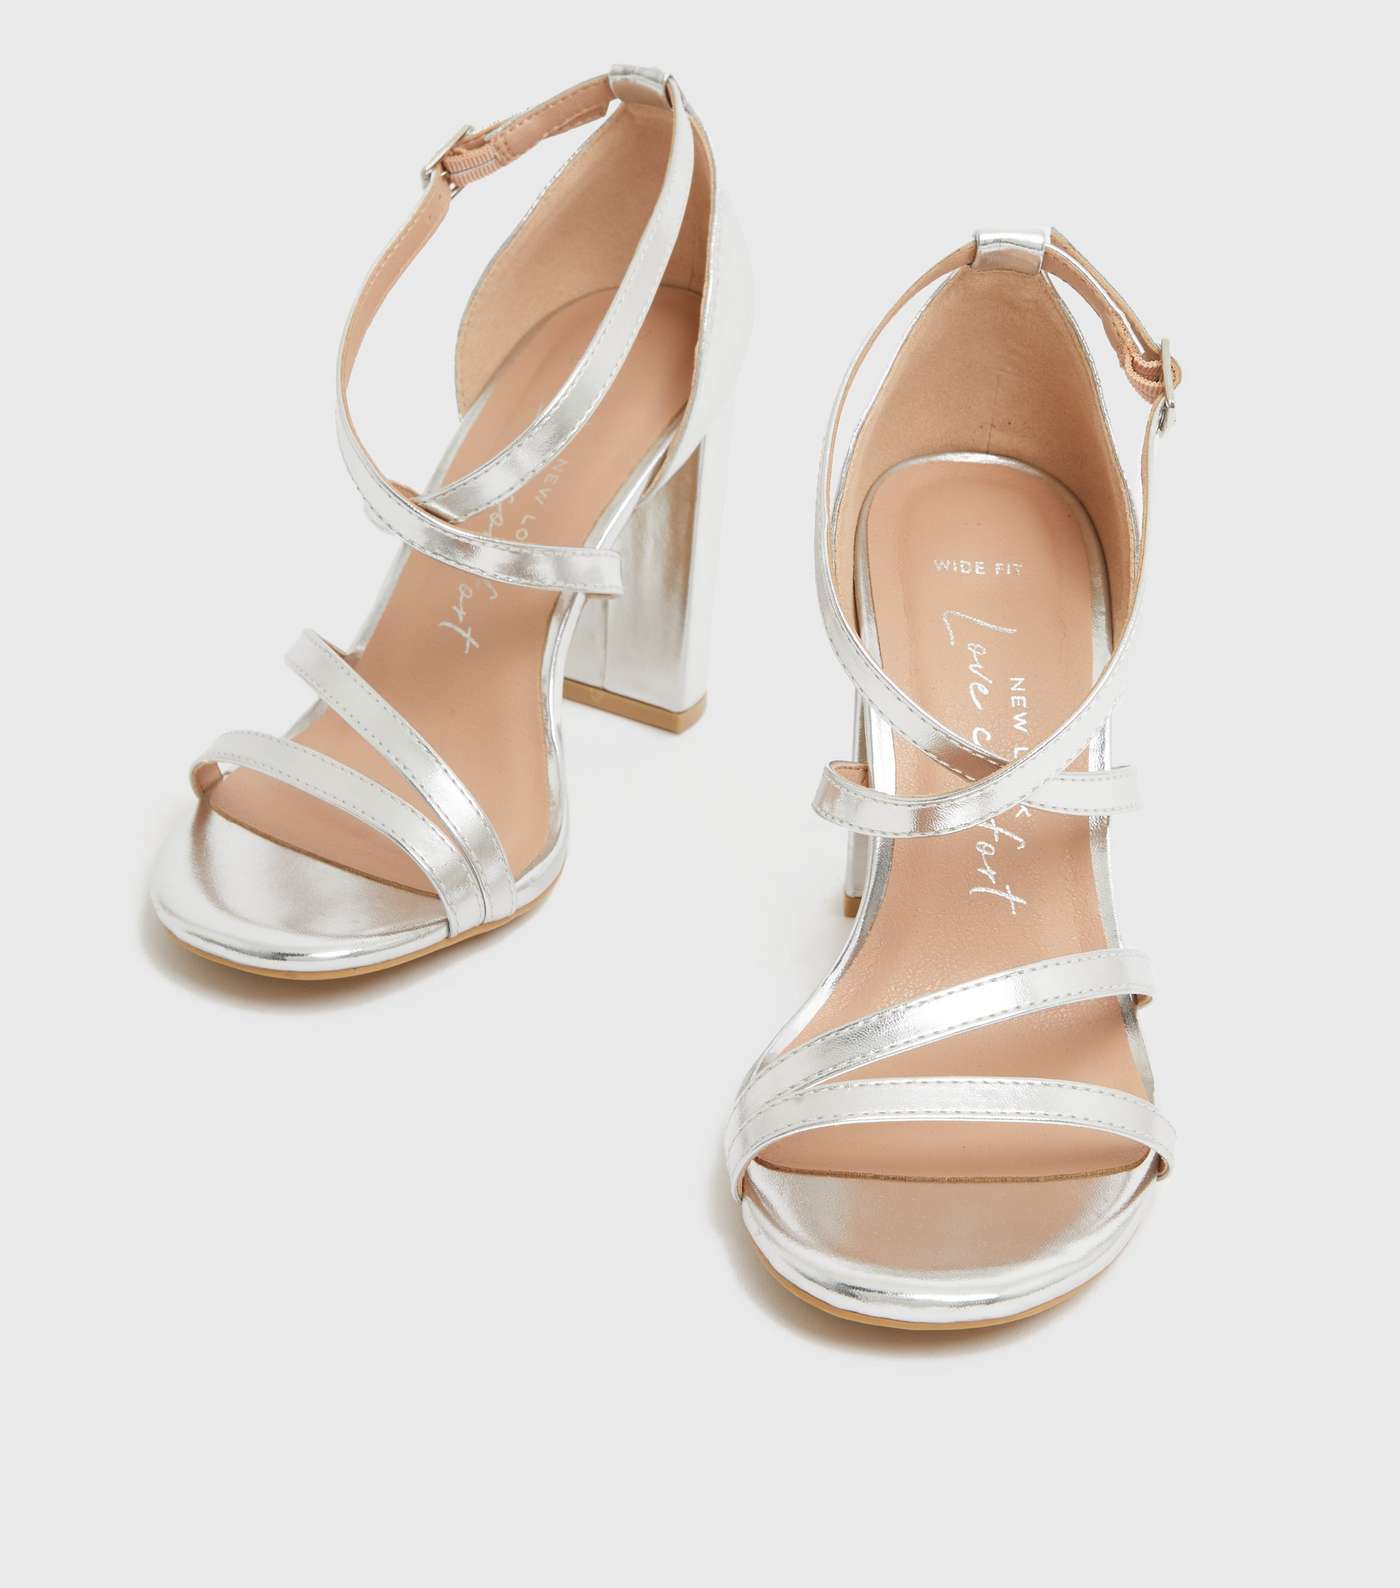 Wide Fit Silver Strappy Block Heel Sandals Image 3